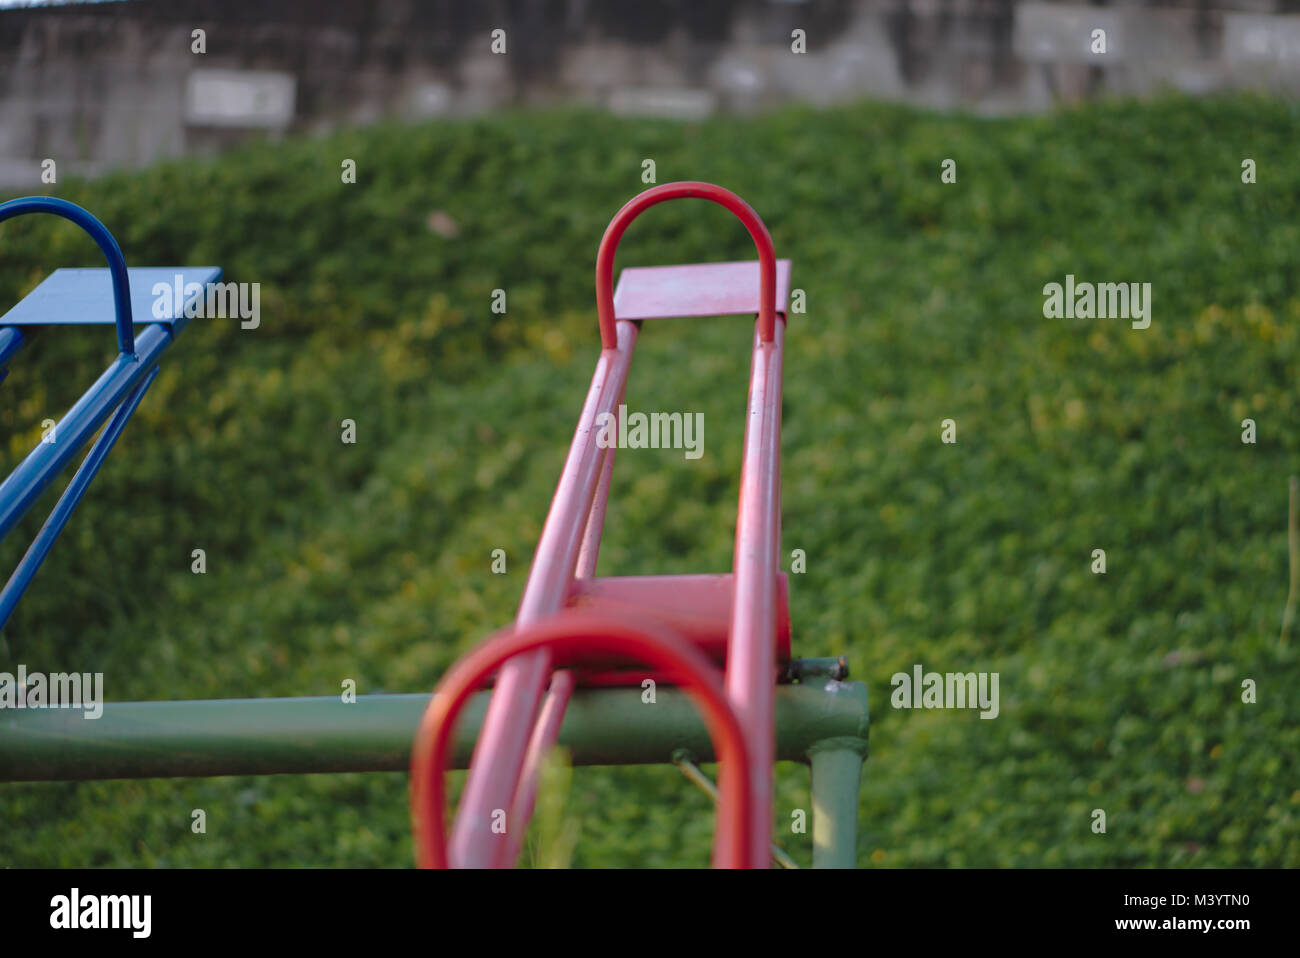 Red and colorful seesaws at a playground. Stock Photo